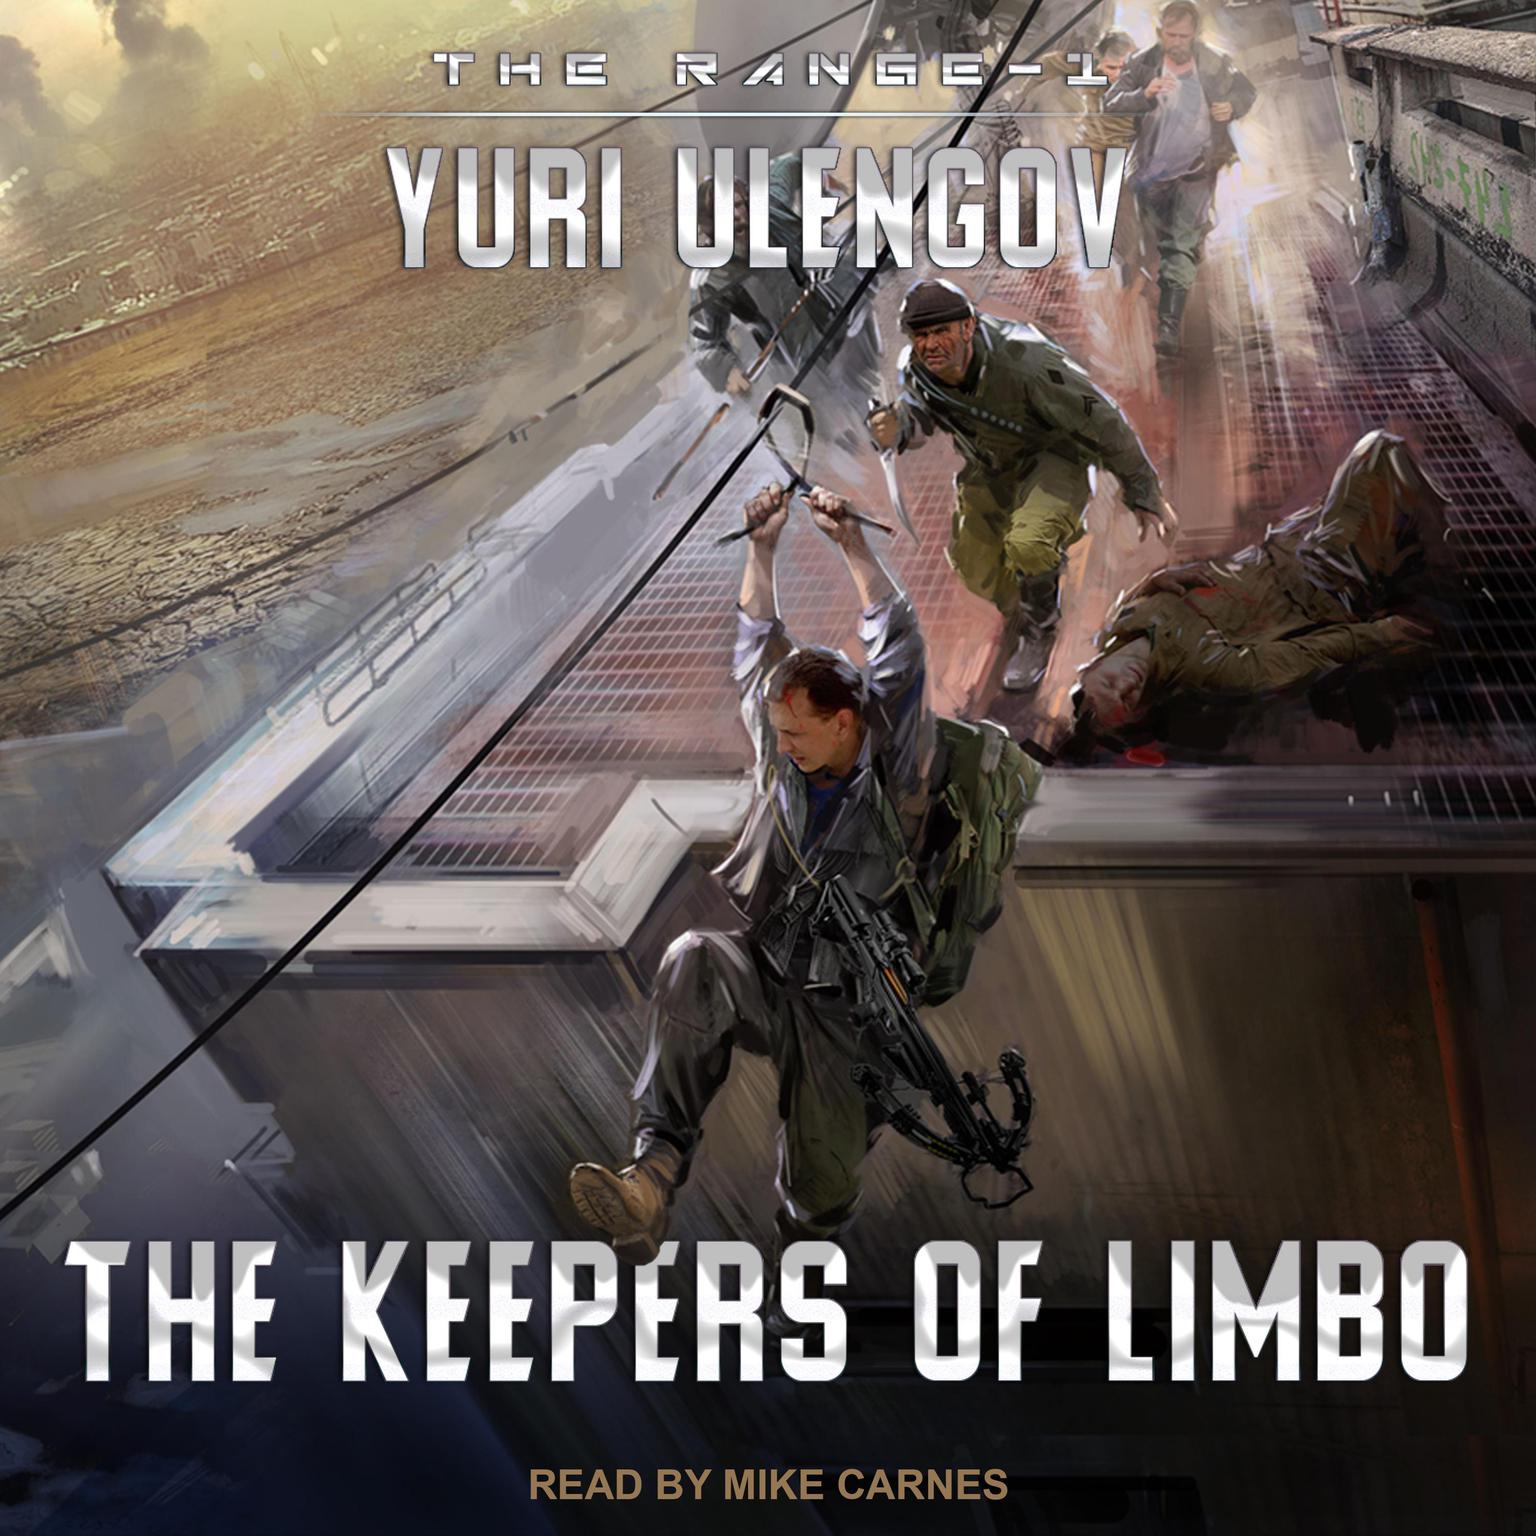 The Keepers of Limbo Audiobook, by Yuri Ulengov